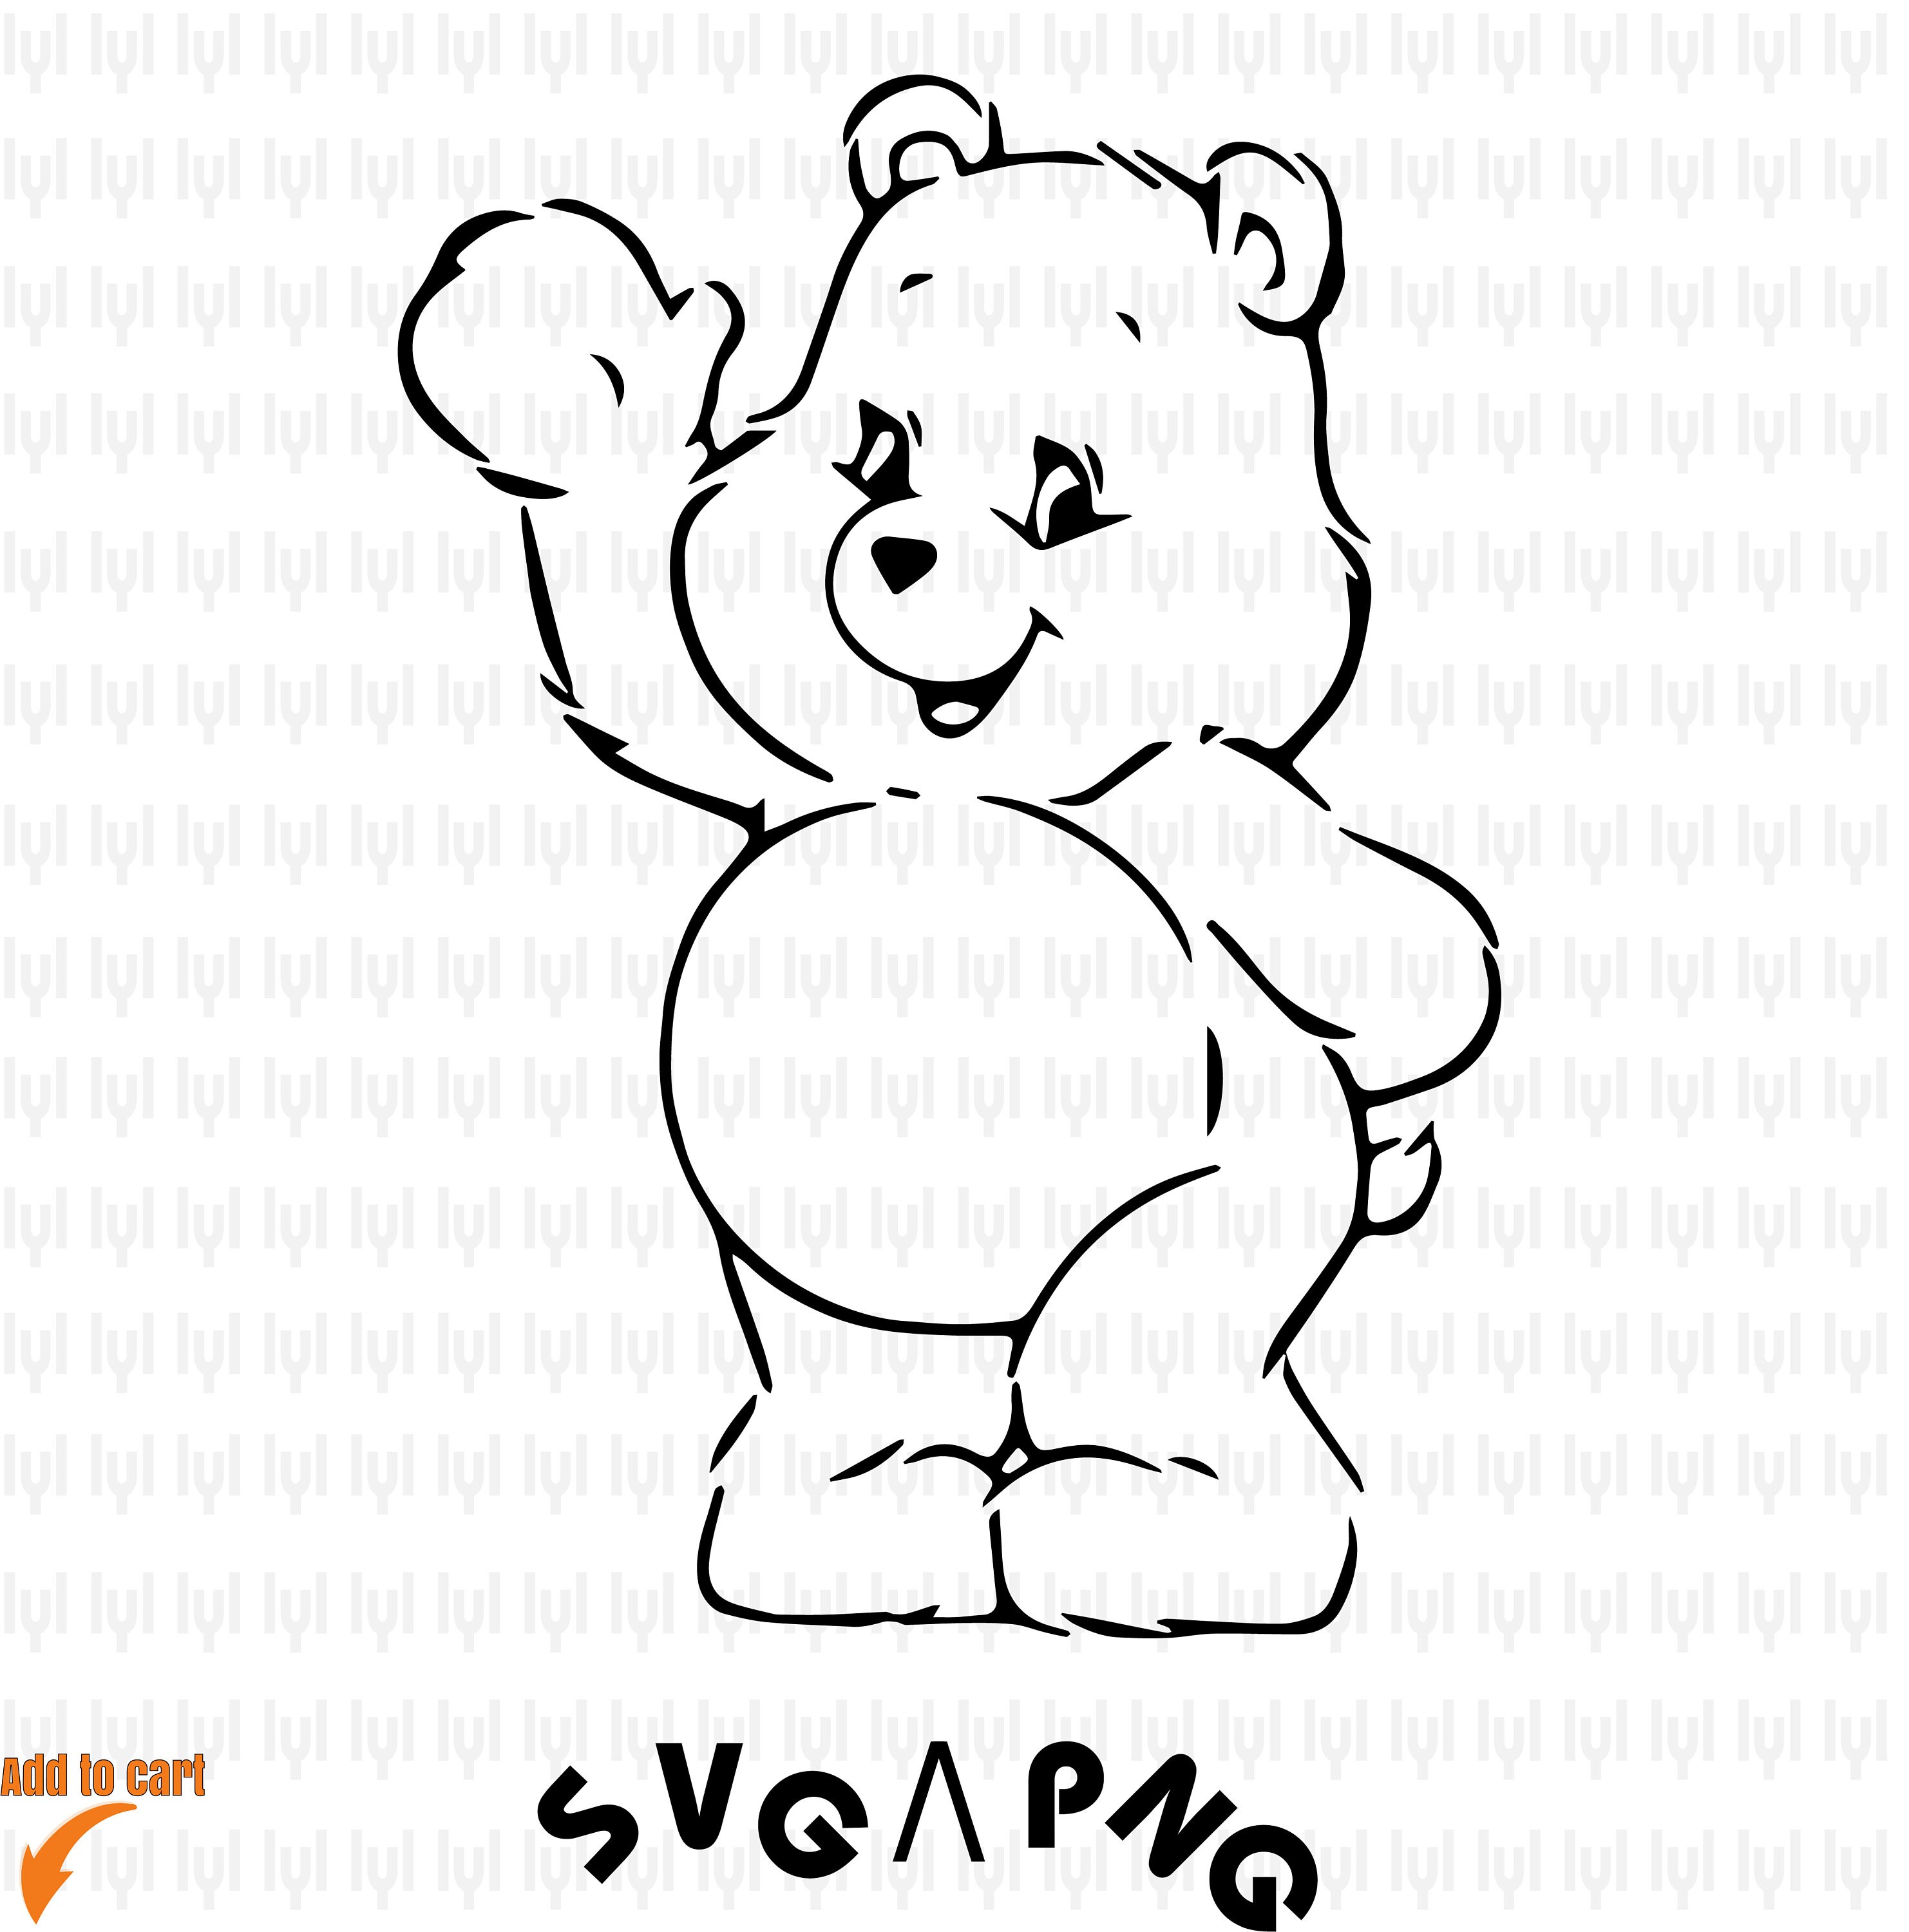 Care Bears Svg, Png, Pdf, Eps, Instant Download , print , sublimation, By  Misky